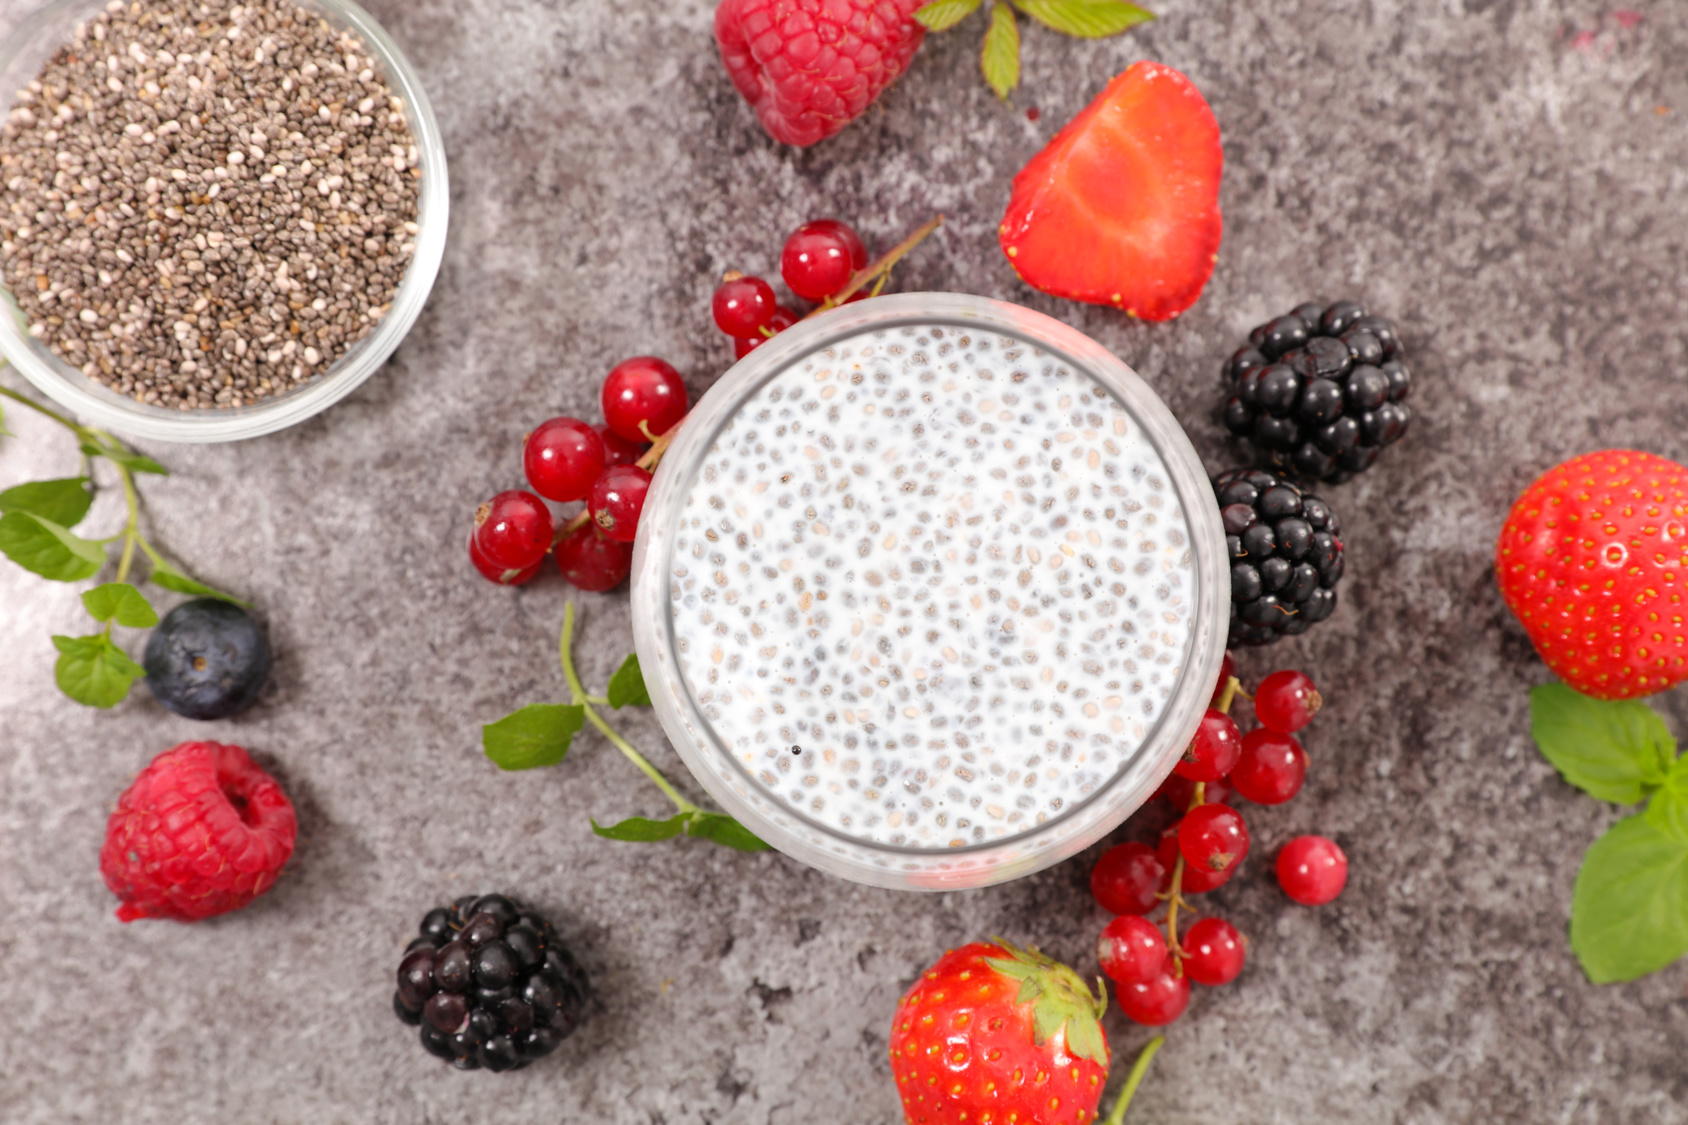 Simply Delicious Sugar-free Mixed Berry Chia Seed Pudding